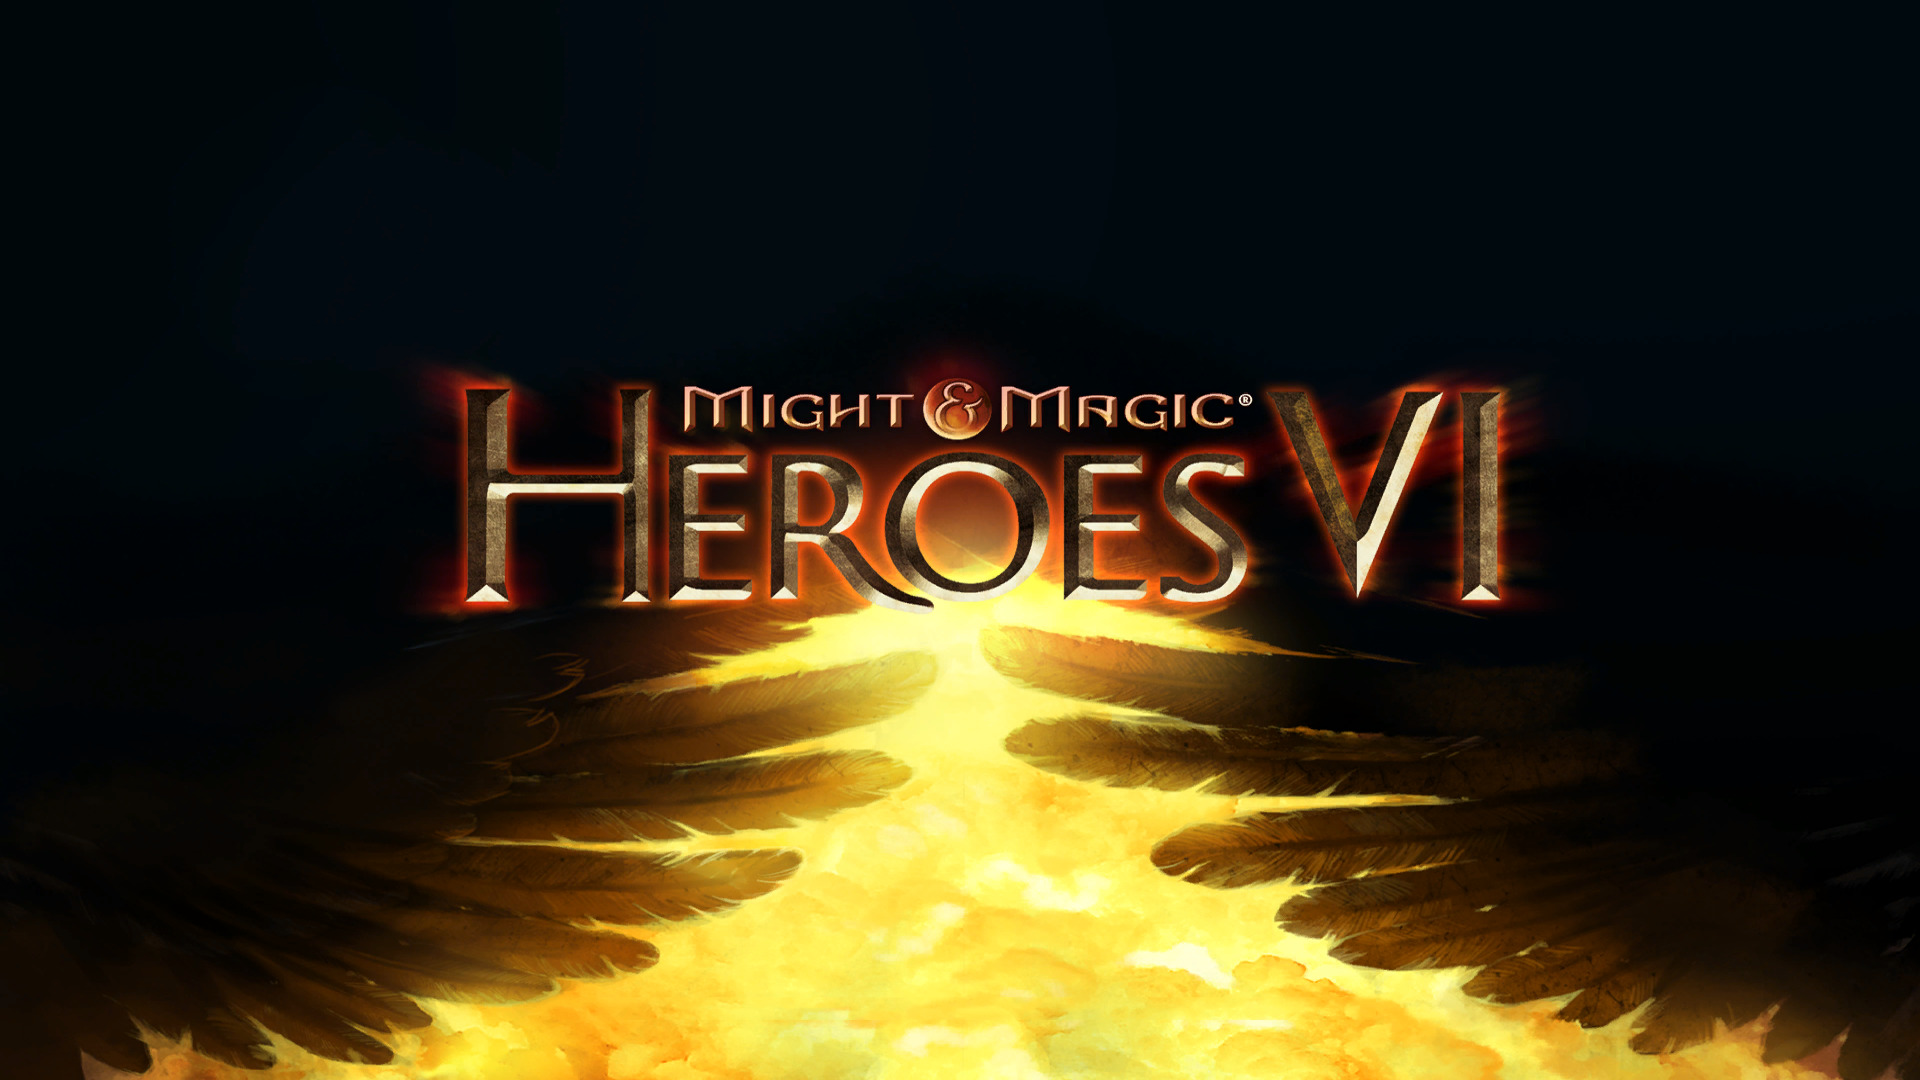 Heroes Of Might And Magic VI Wallpaper